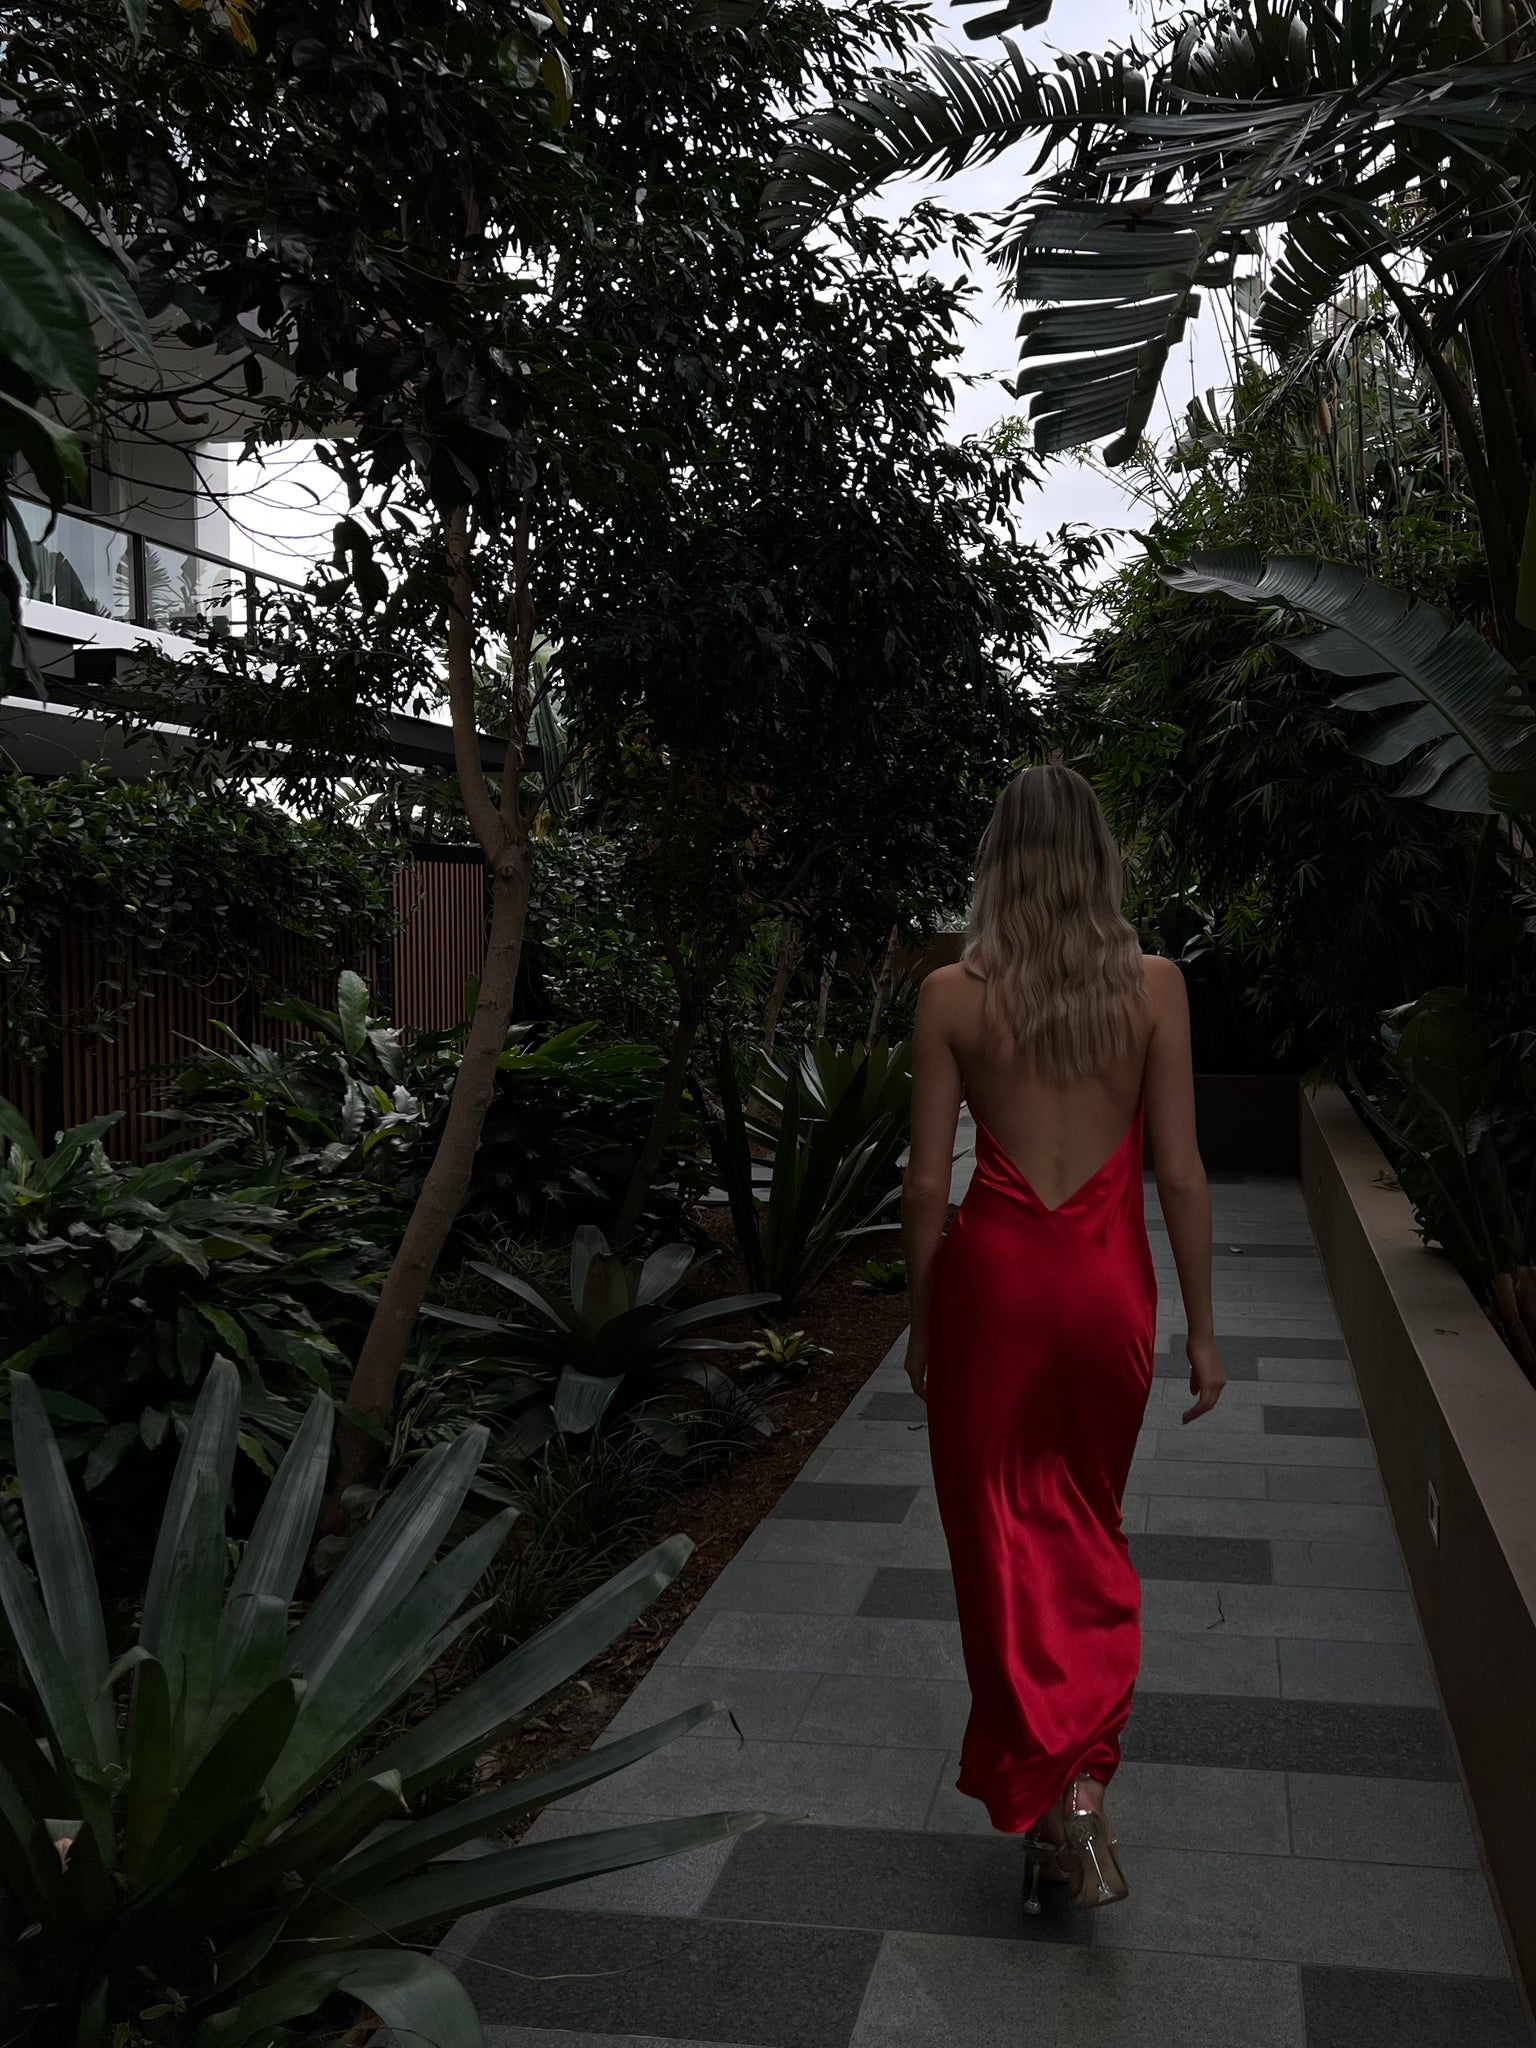 RED CROSSOVER MAXI